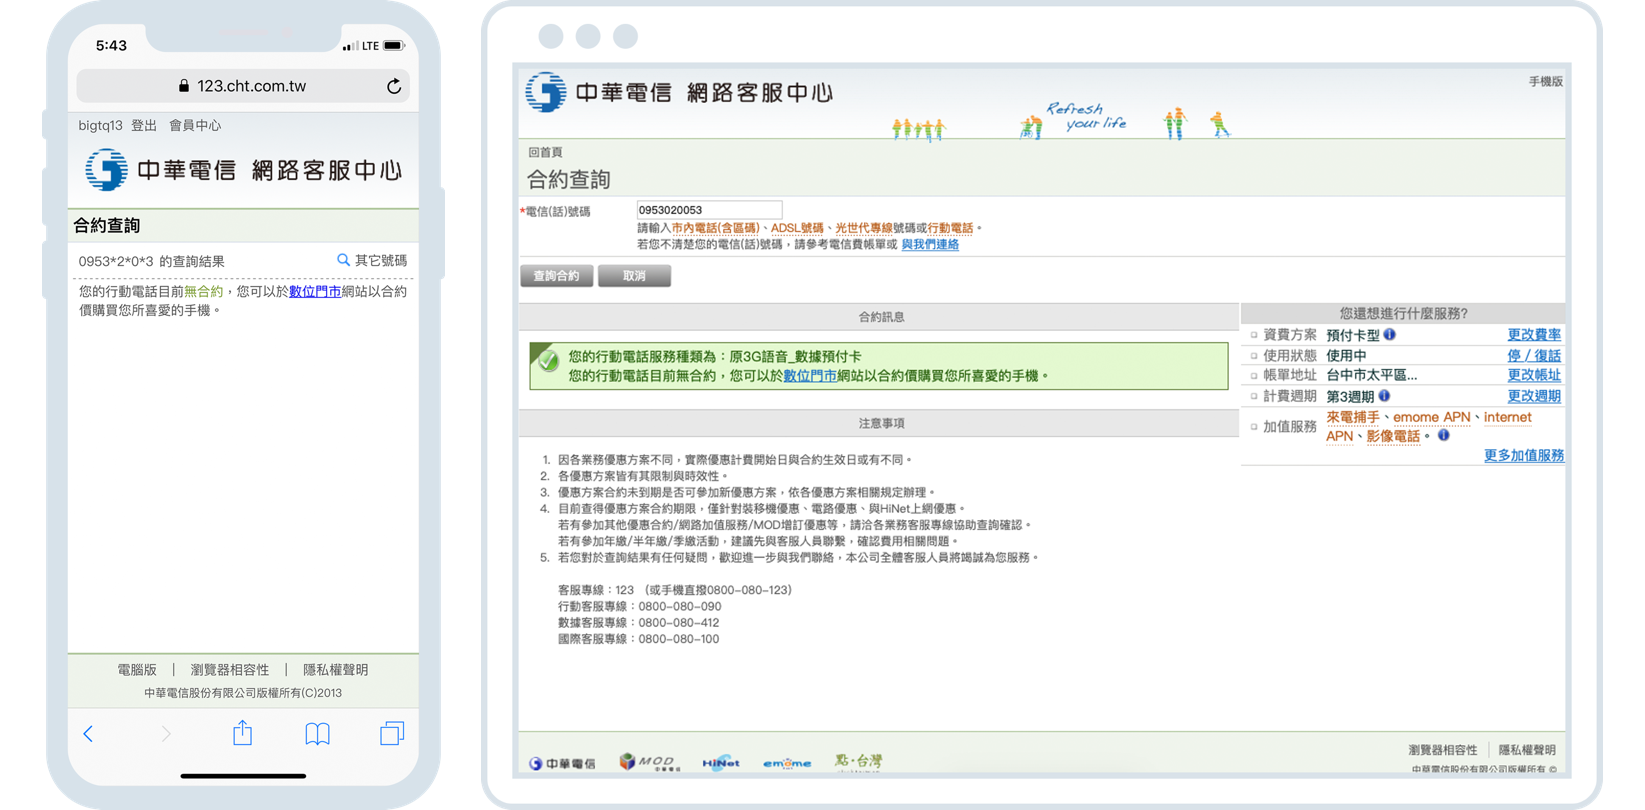 Two screens. the left one is mobile version, showing contract information; the right one is web version, showing contract information and related information about the number users provide.